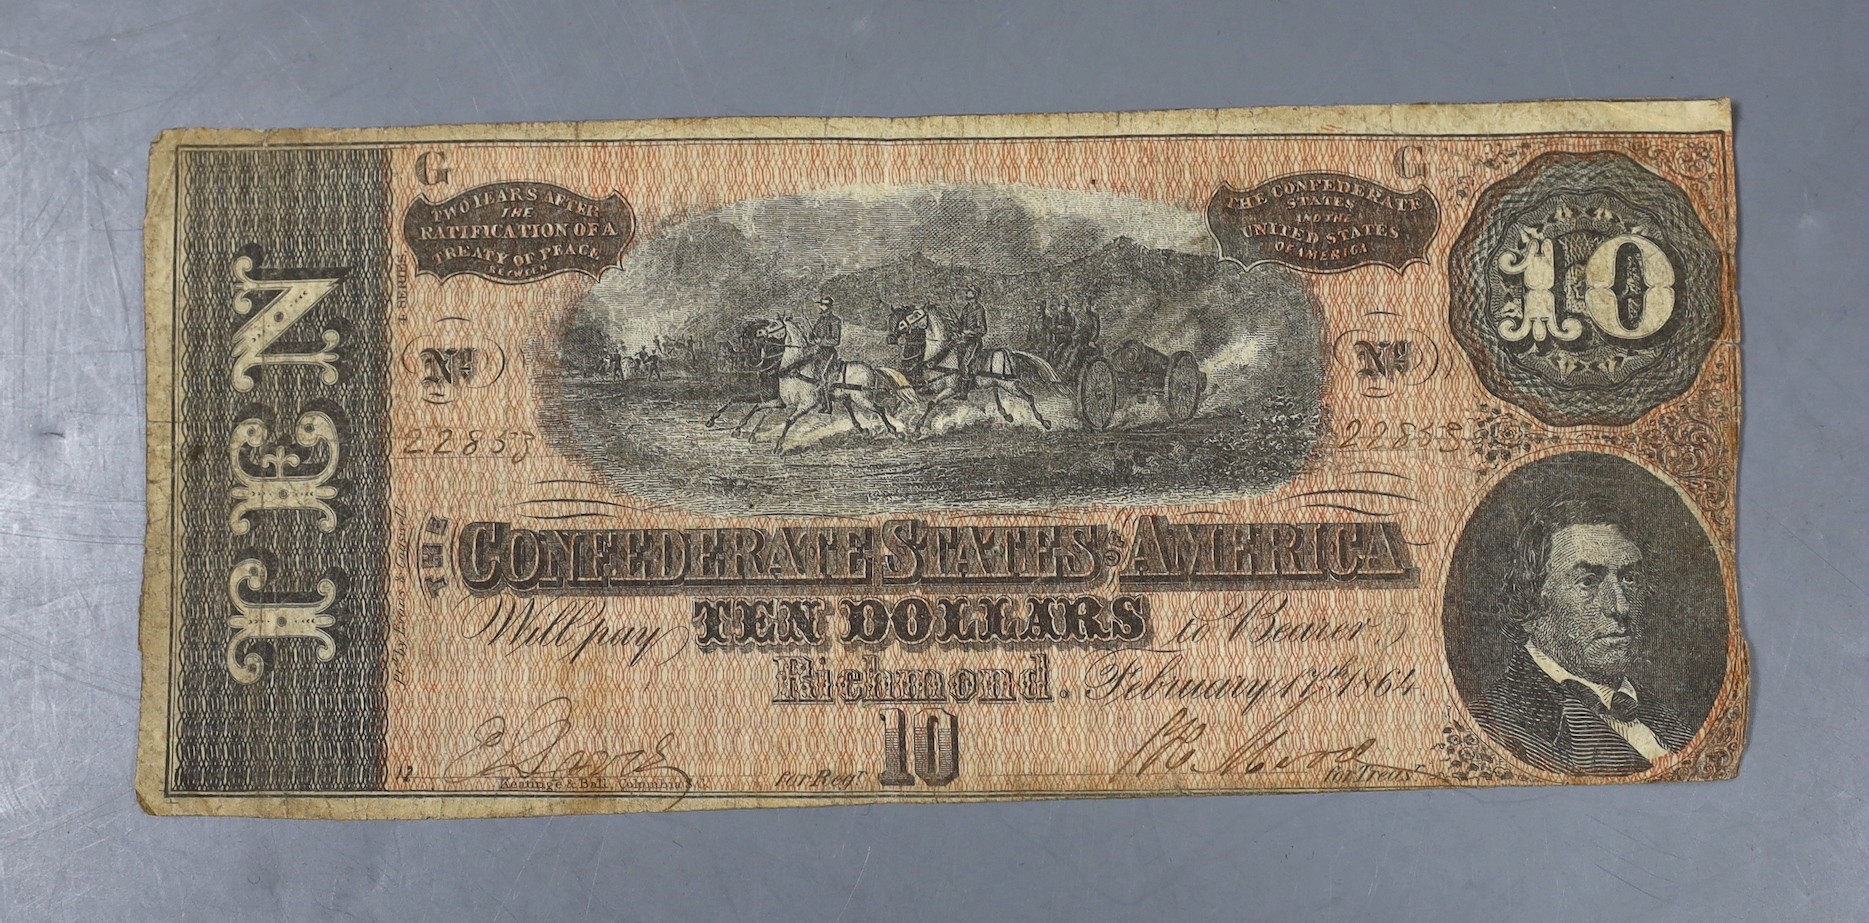 US Confederate States of America Ten Dollar banknote, 1864